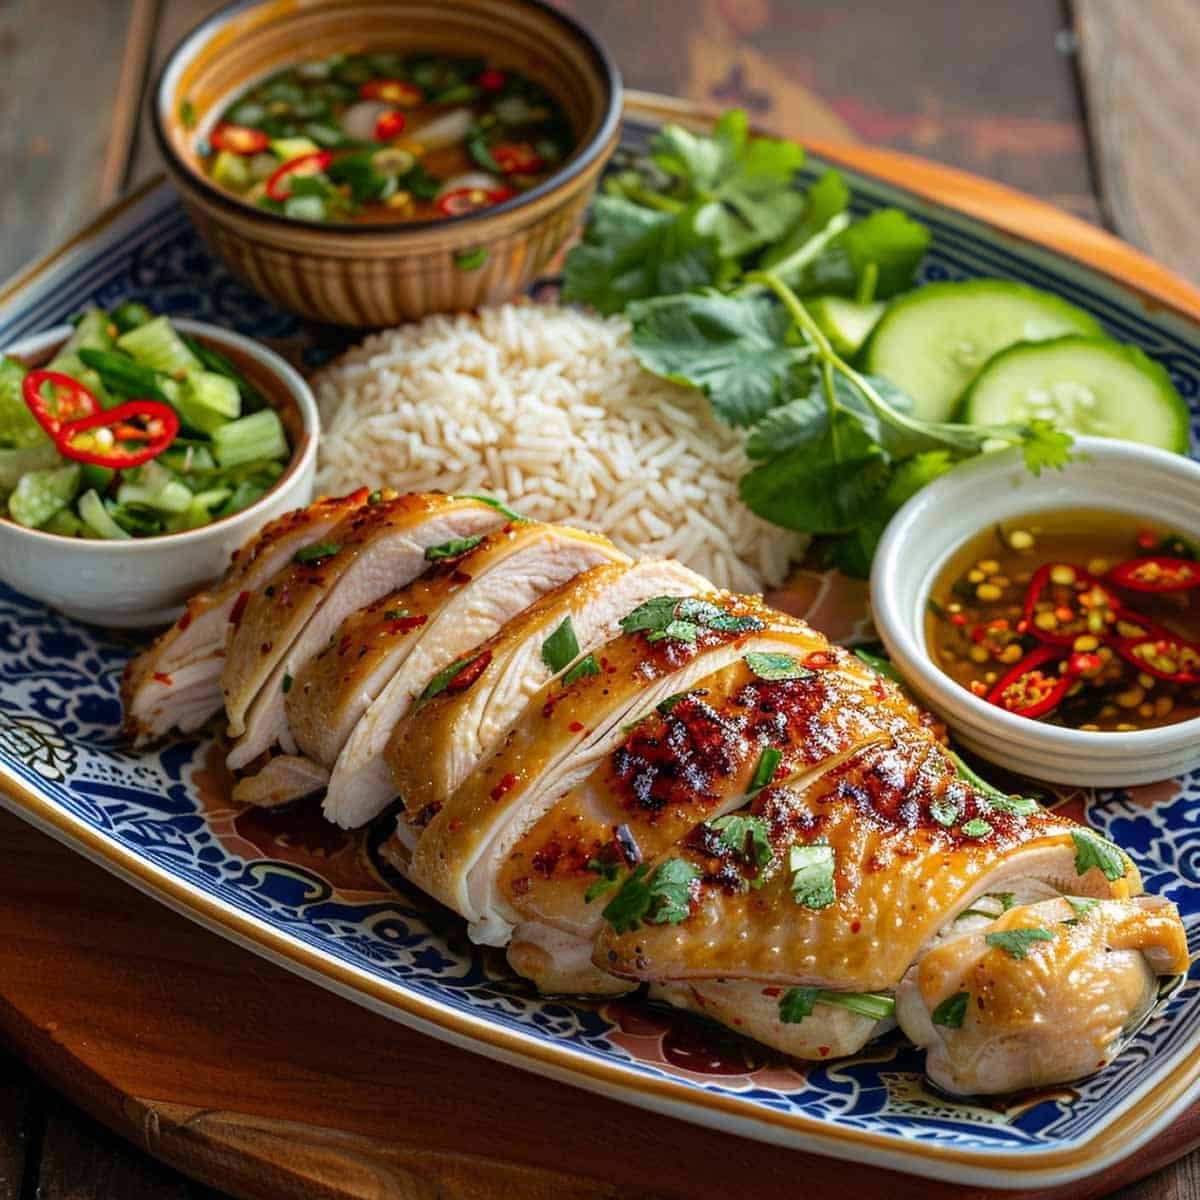 Plate of Khao Man Gai, Thai-style chicken and rice topped with a side of cucumber salad and served with a savory sauce.